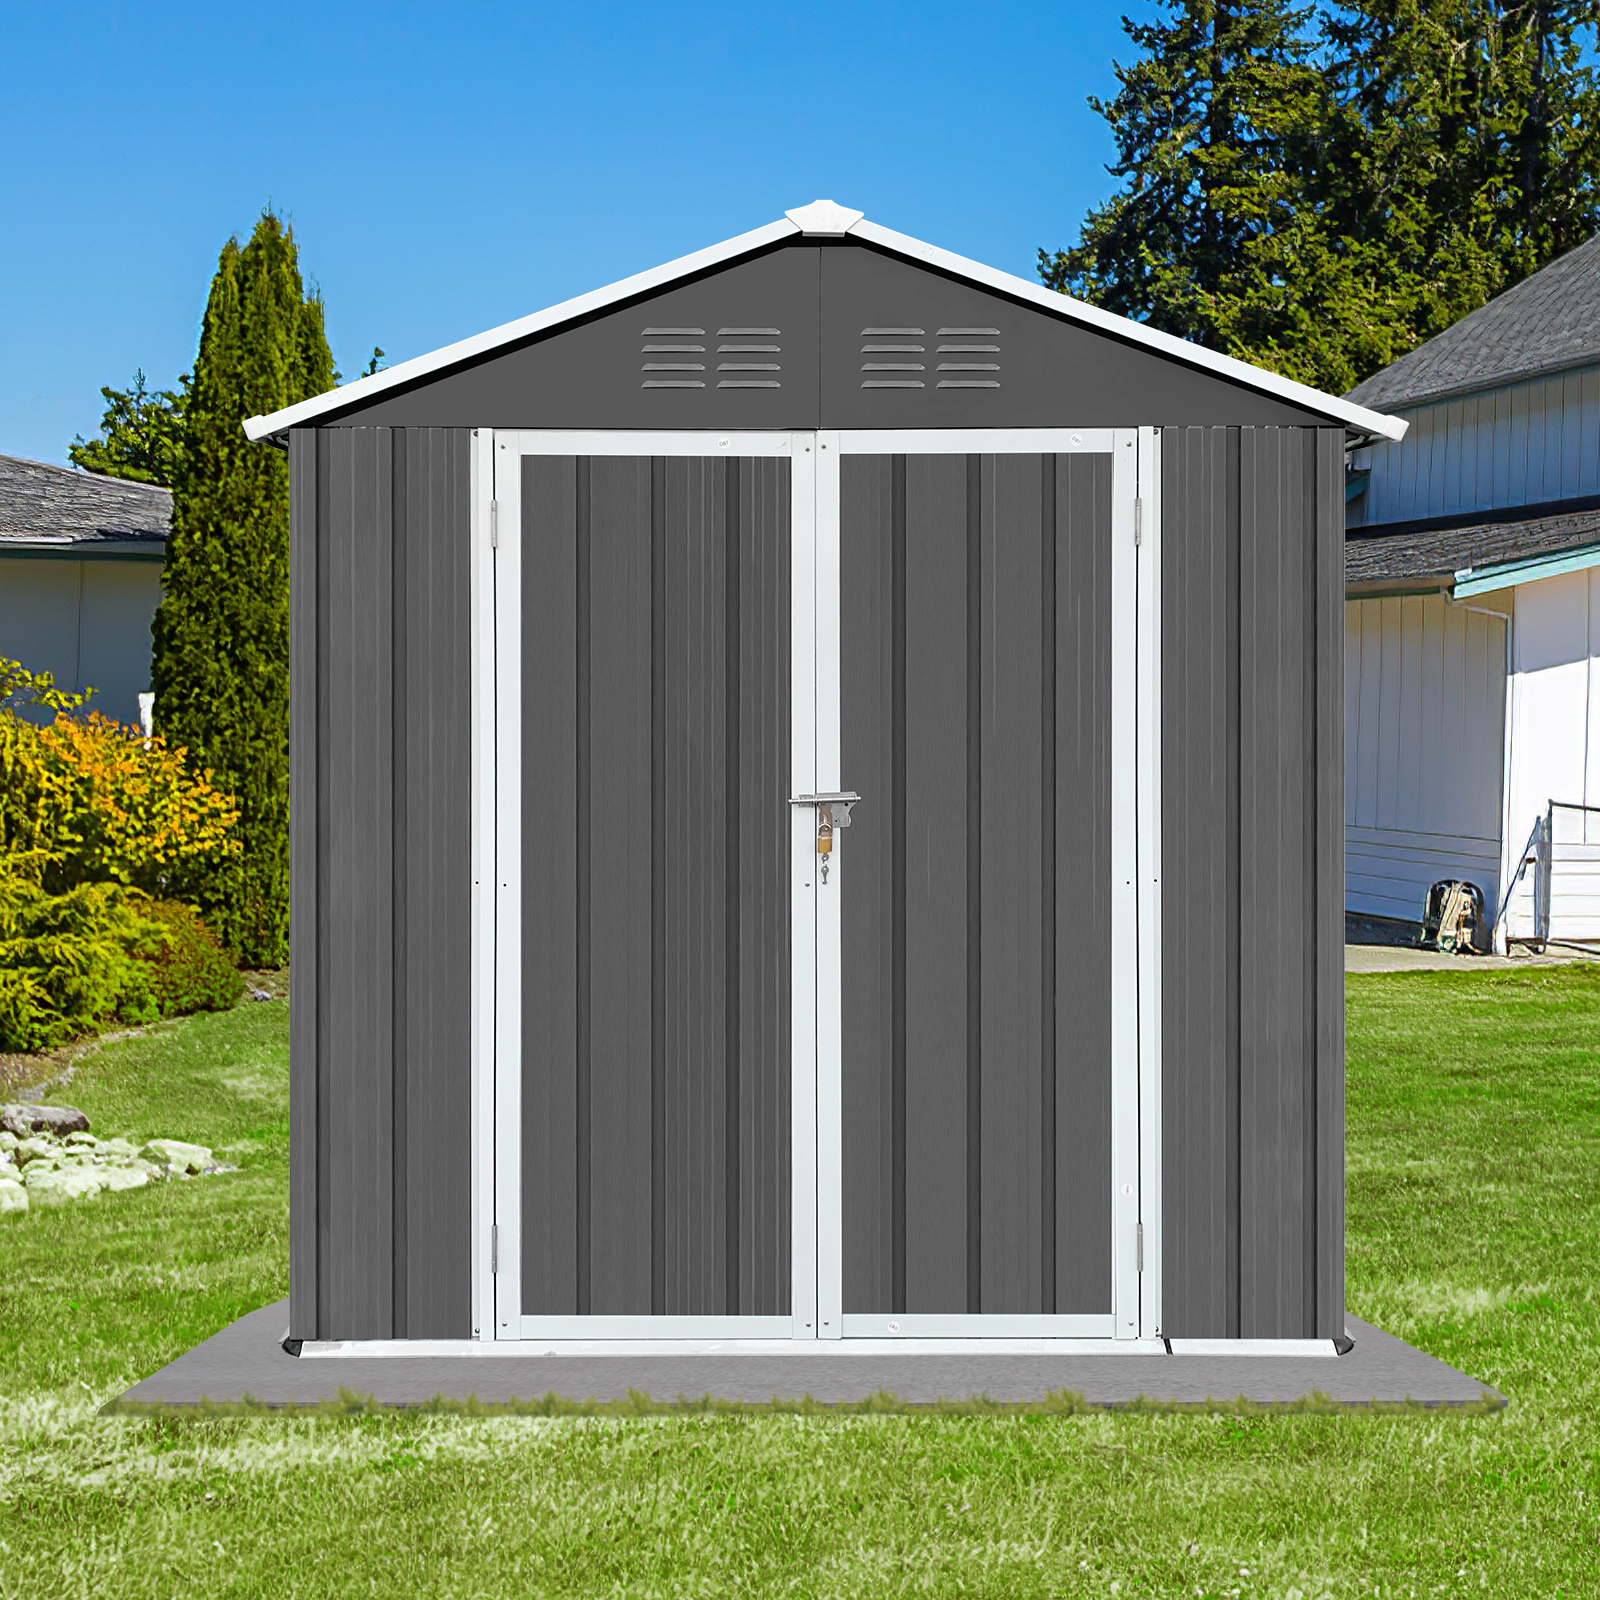 6' x 4' Outdoor Metal Storage Shed, Tools Storage Shed, Galvanized Steel Garden Shed with Lockable Doors, Outdoor Storage Shed for Backyard, Patio, Lawn, D8311 - image 3 of 9